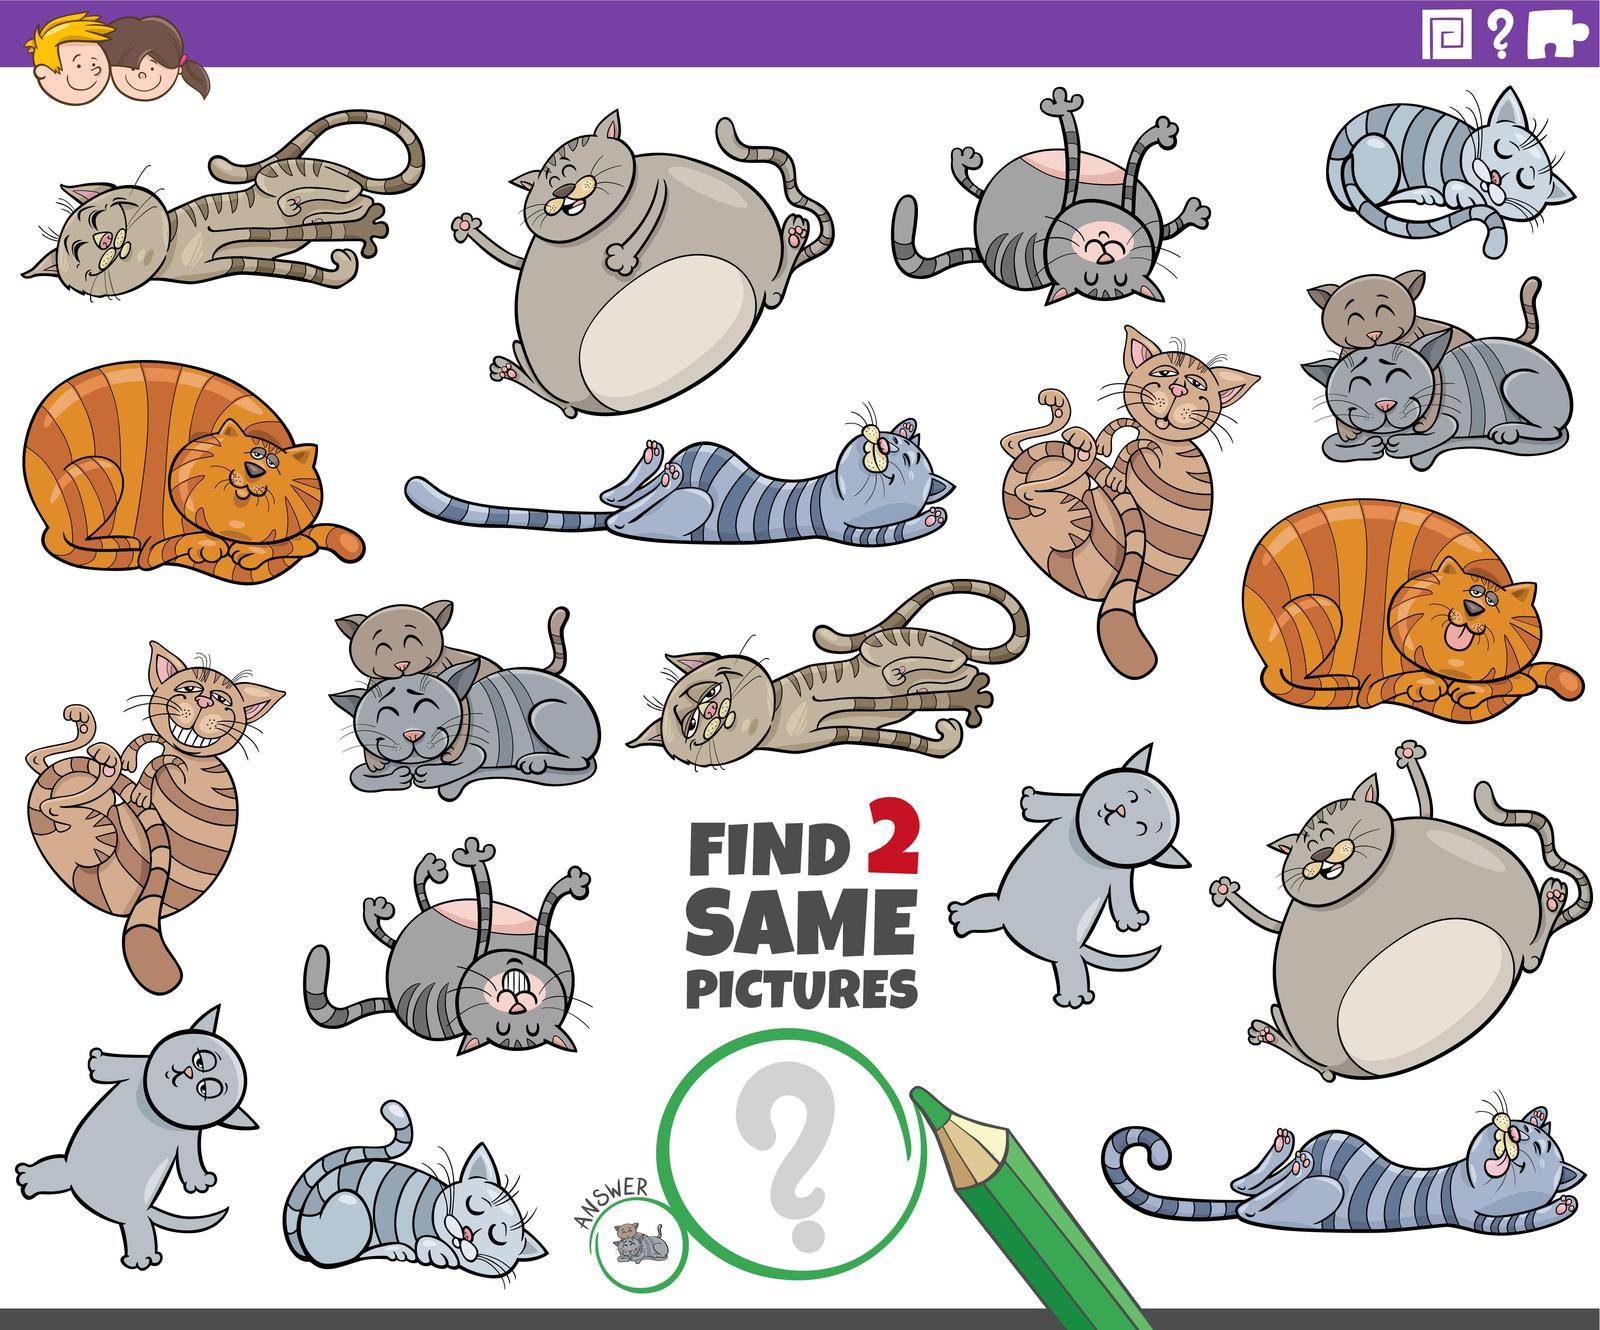 Cartoon illustration of finding two same pictures educational game with sleeping cats animal characters